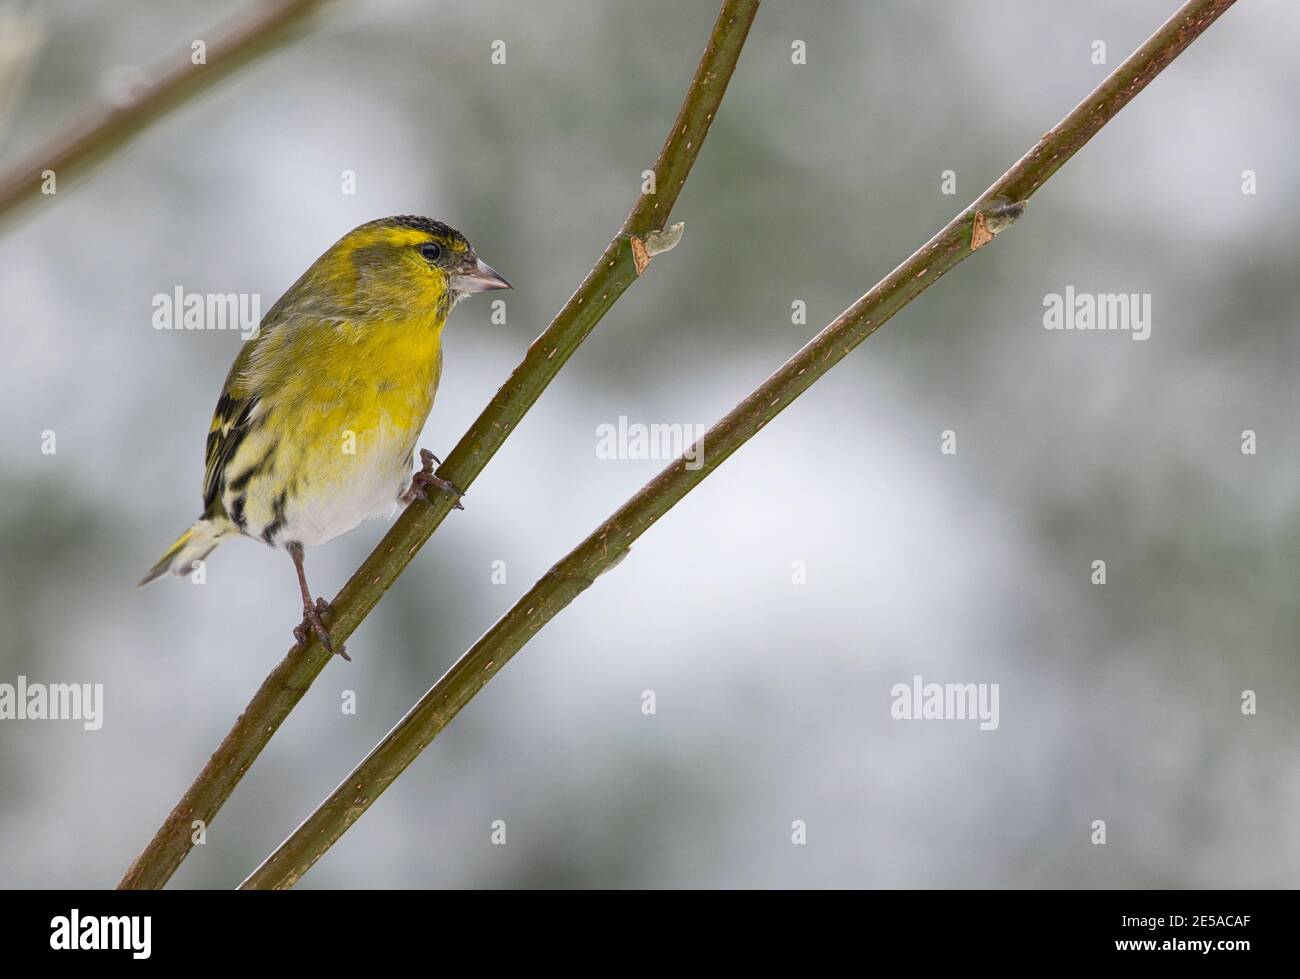 Male Eurasian siskin (Carduelis spinus) perched in a garden tree in winter Stock Photo